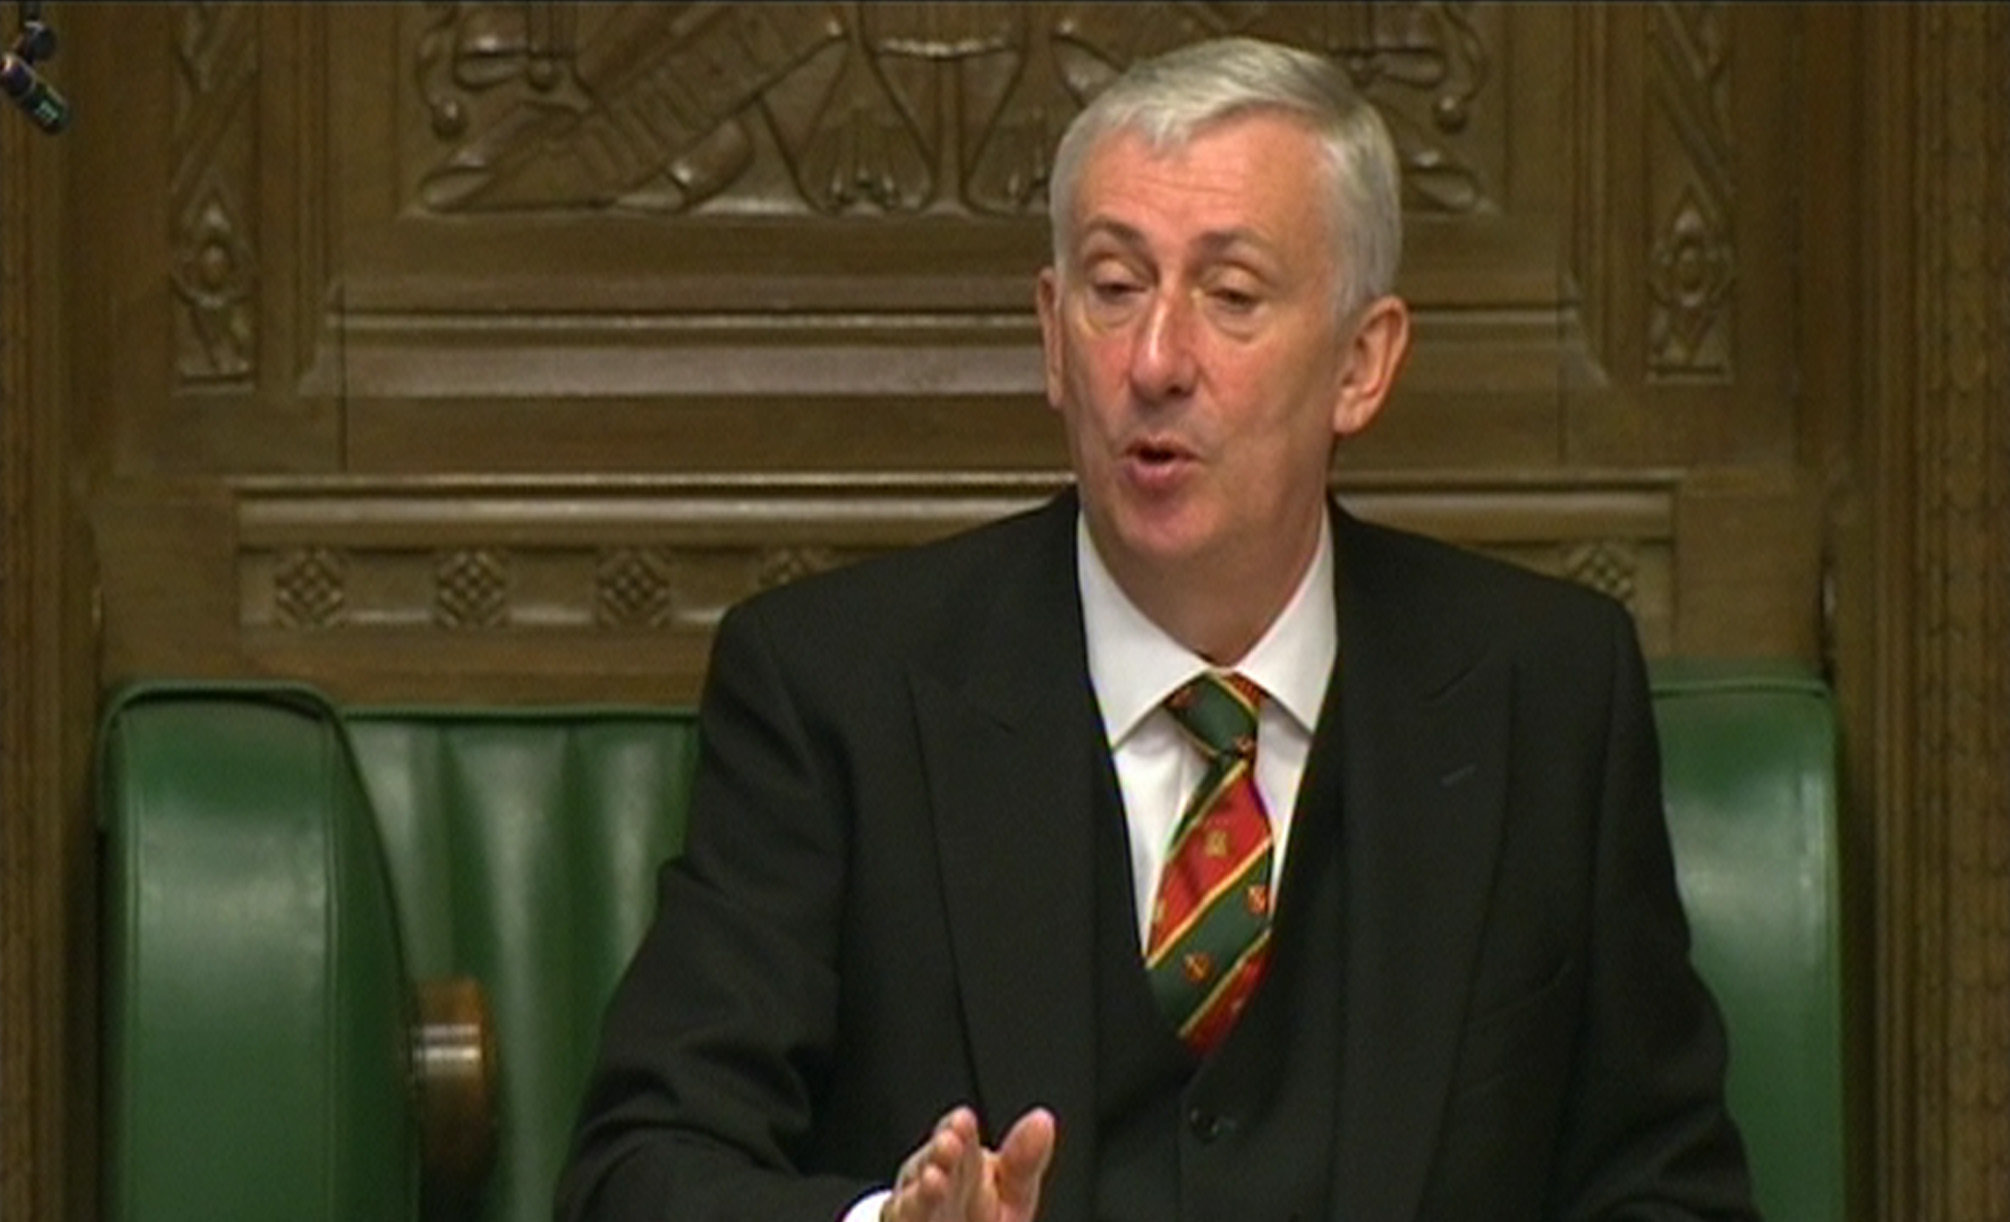 <strong>Deputy Speaker of the House of Commons, Lindsay Hoyle, has paid emotional tribute to his daughter Natalie, who has died suddenly, aged 28</strong>